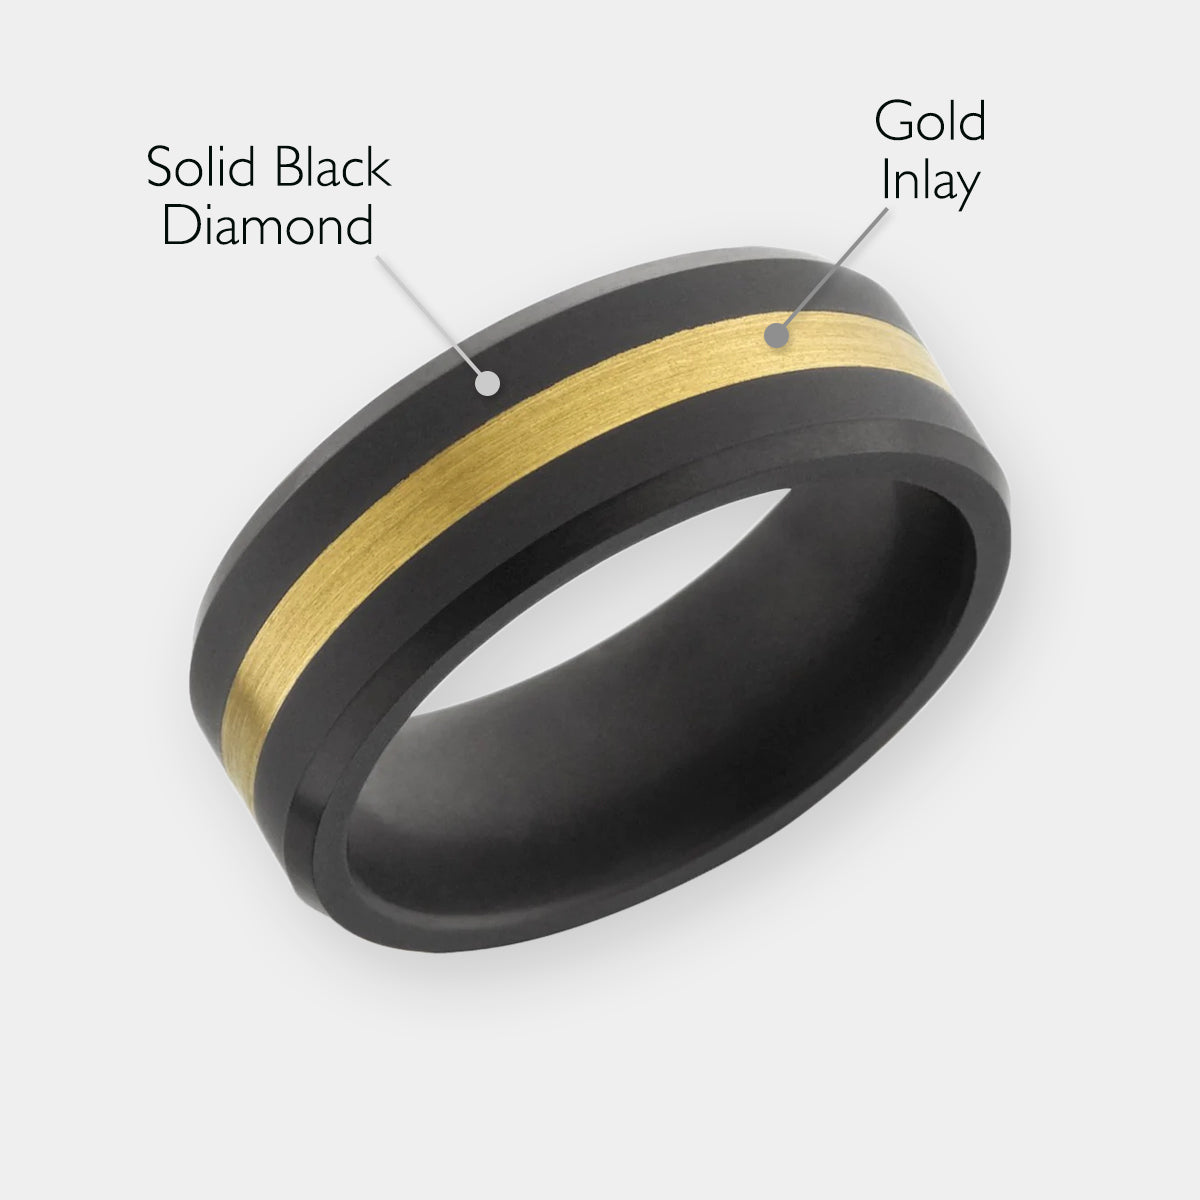 Men's Black Diamond & 14k Yellow Gold Inlay with material descriptions listed | Elysium ARES | Men’s 14k Yellow Gold Rings | 14k Yellow Gold Inlay Wedding Ring